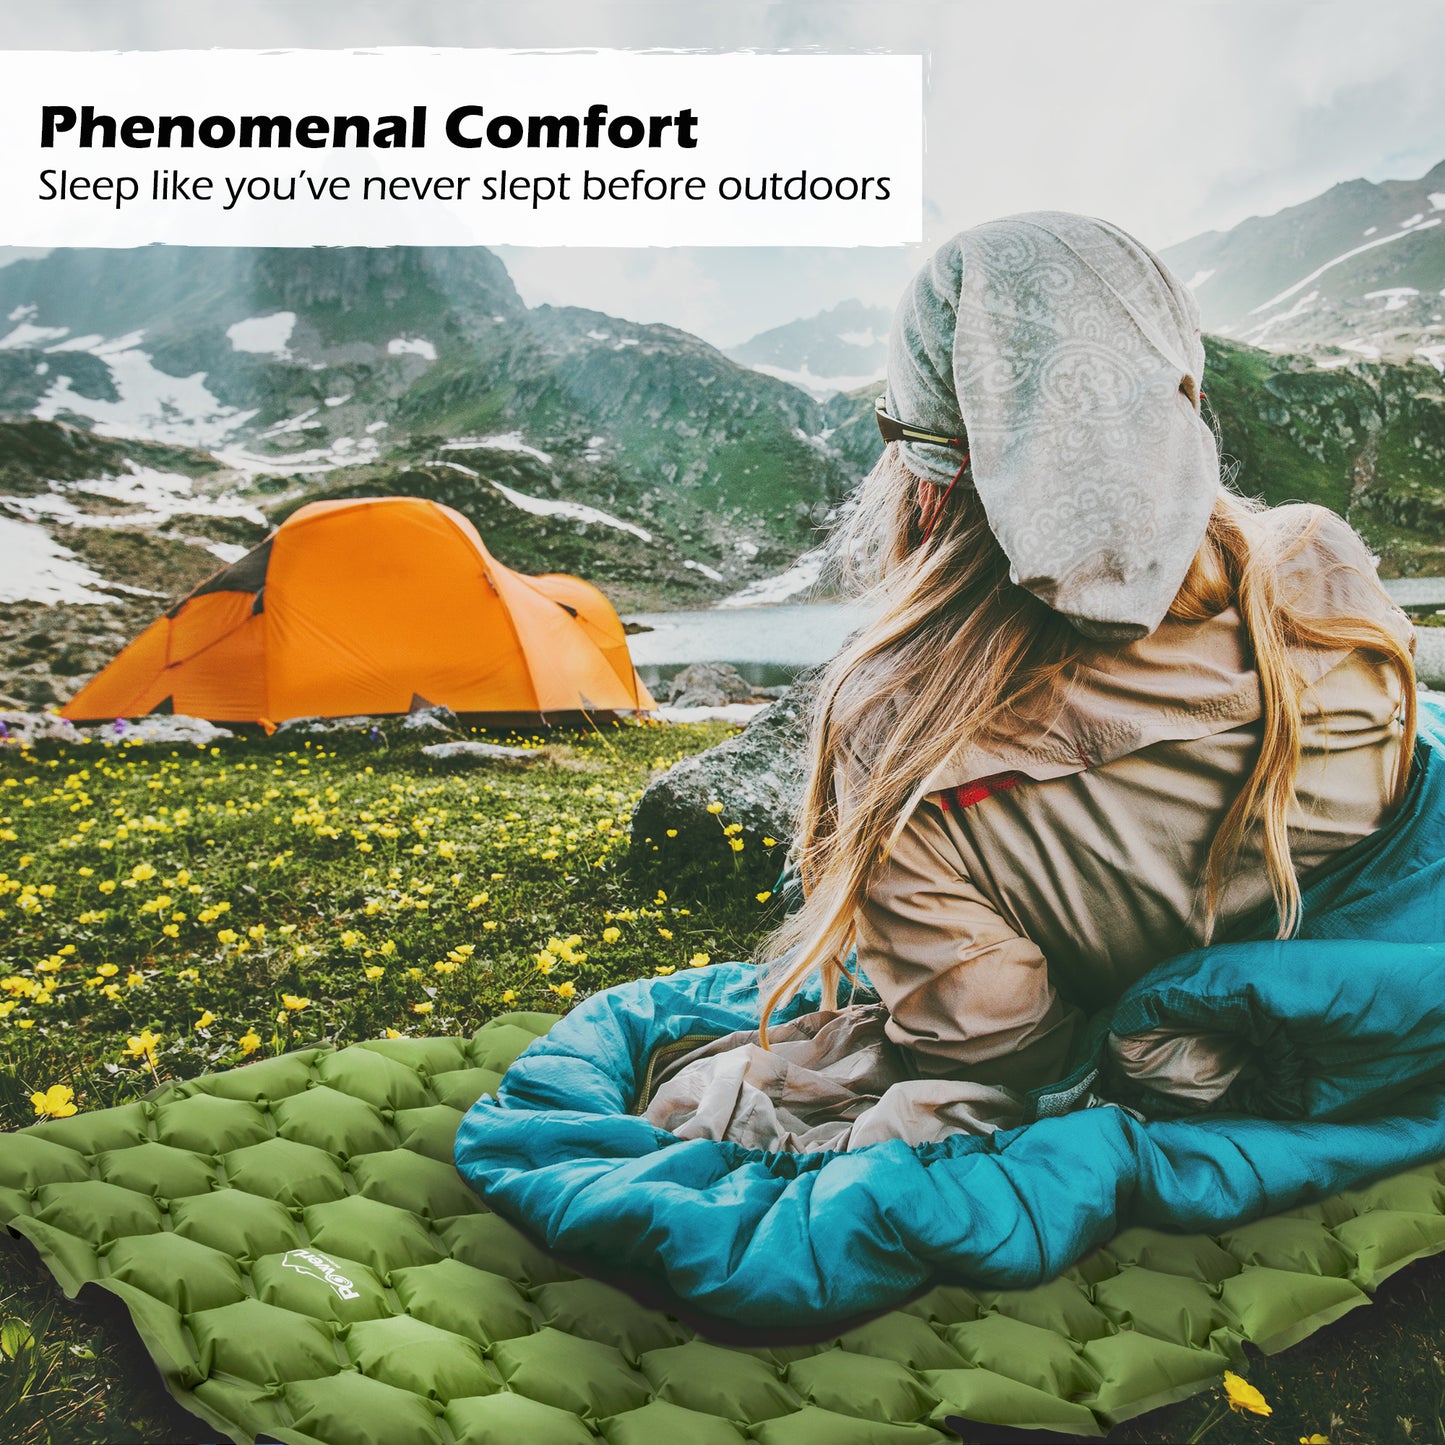 Model laying on a green, inflated Powerlix sleeping pad in the mountains. Tect reads, "Phenomenal Comfort. Sleep like you've never slept before outdoors."